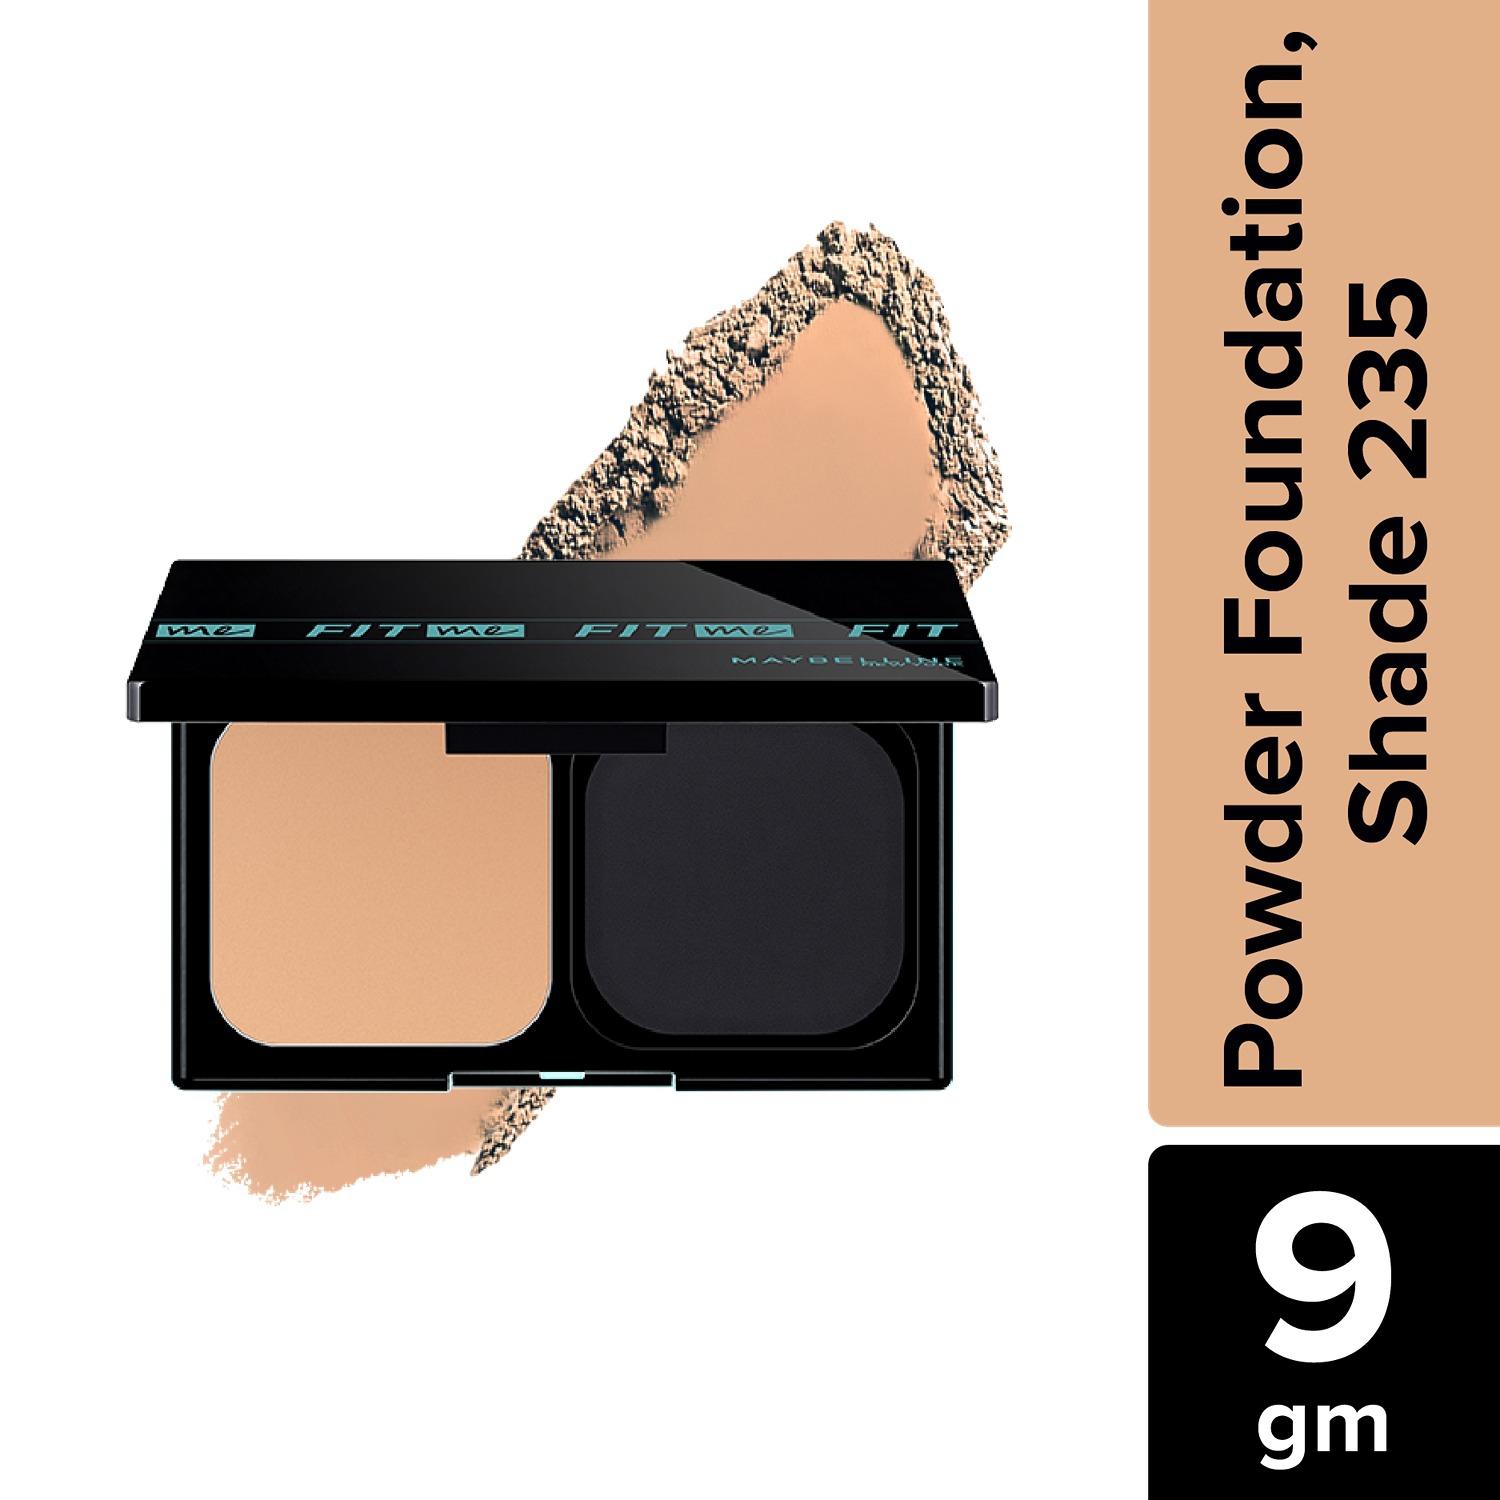 Maybelline New York | Maybelline New York Fit Me Ultimate Powder Foundation - Shade 310 (9g)